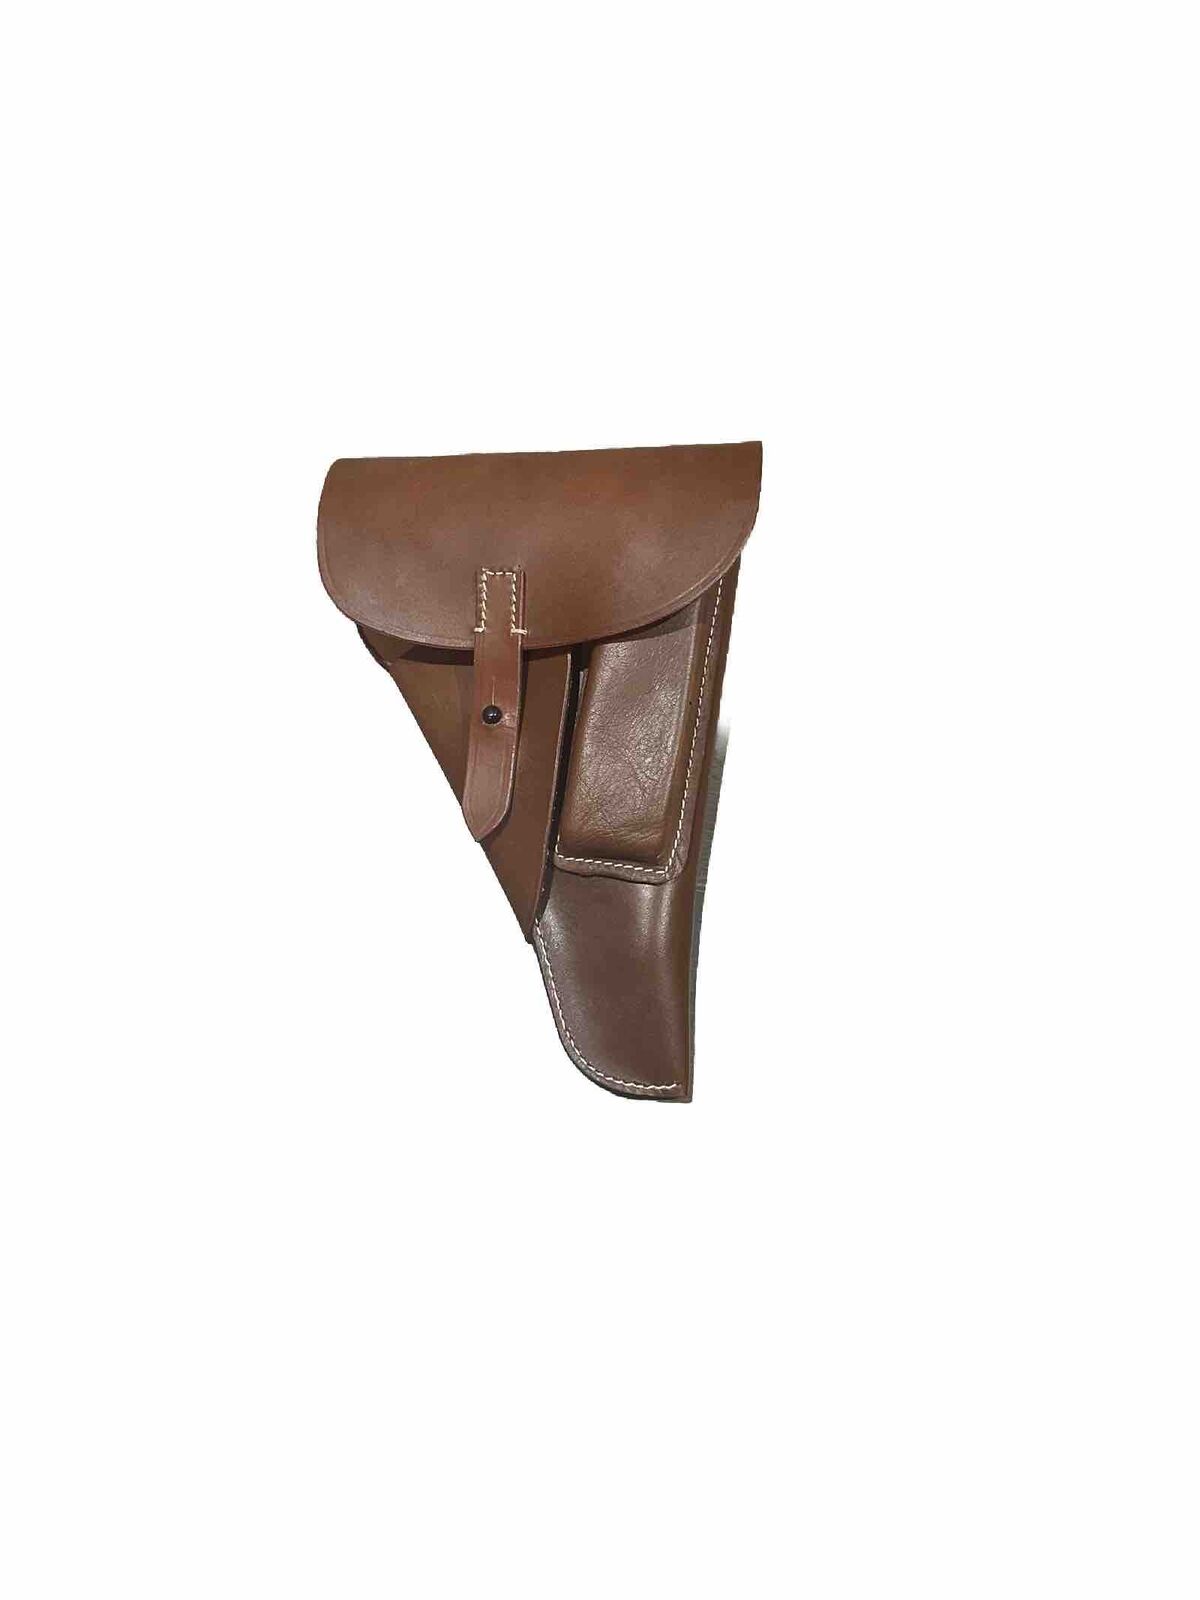 German WWII P38 Brown Leather Holster P38 WWII Reproduction